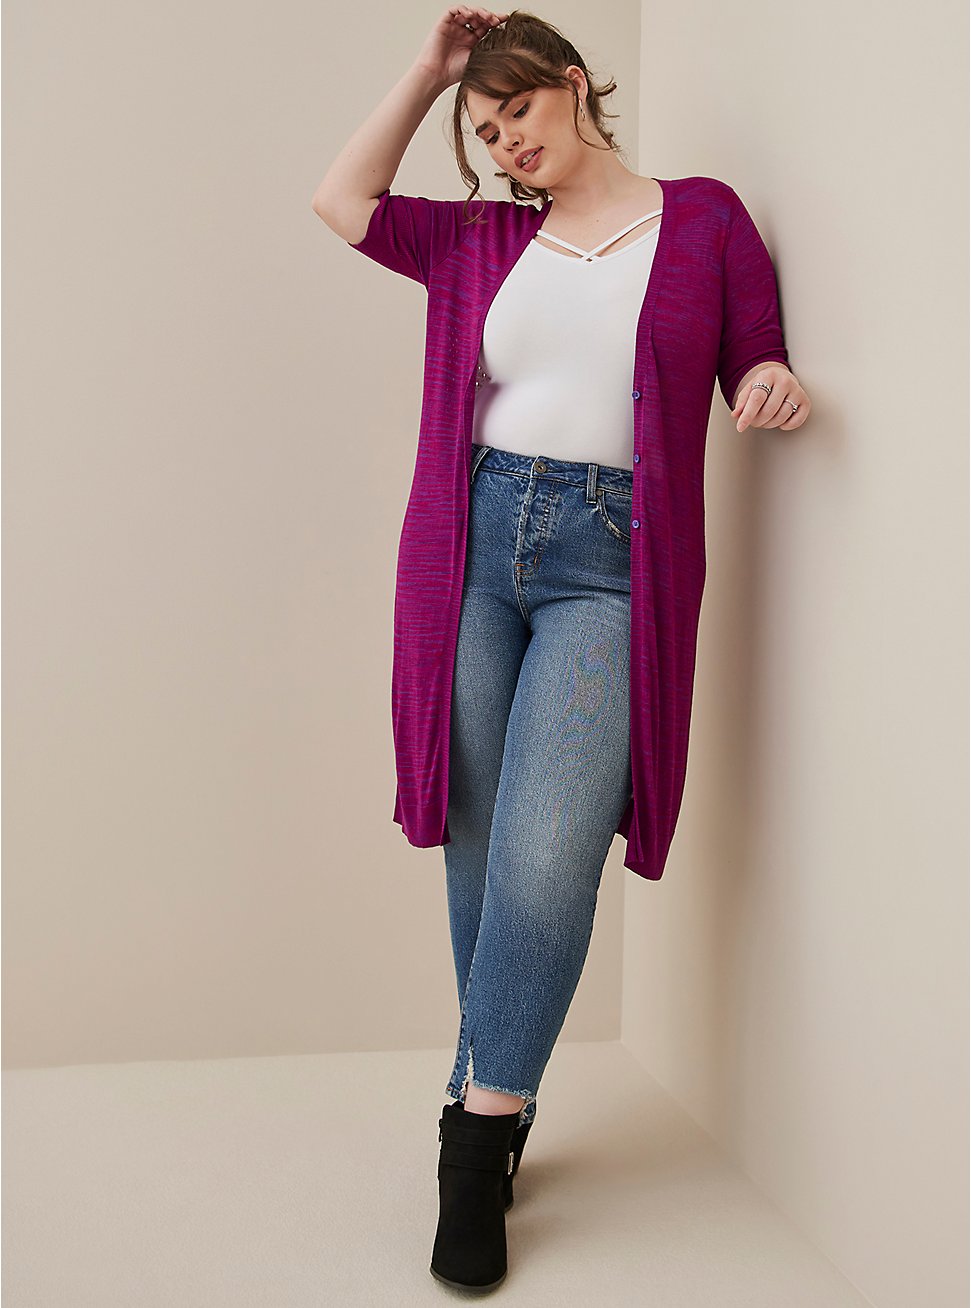 Plus Size Fitted Duster Cardigan - Neon Space Dye Pink , PINK, hi-res